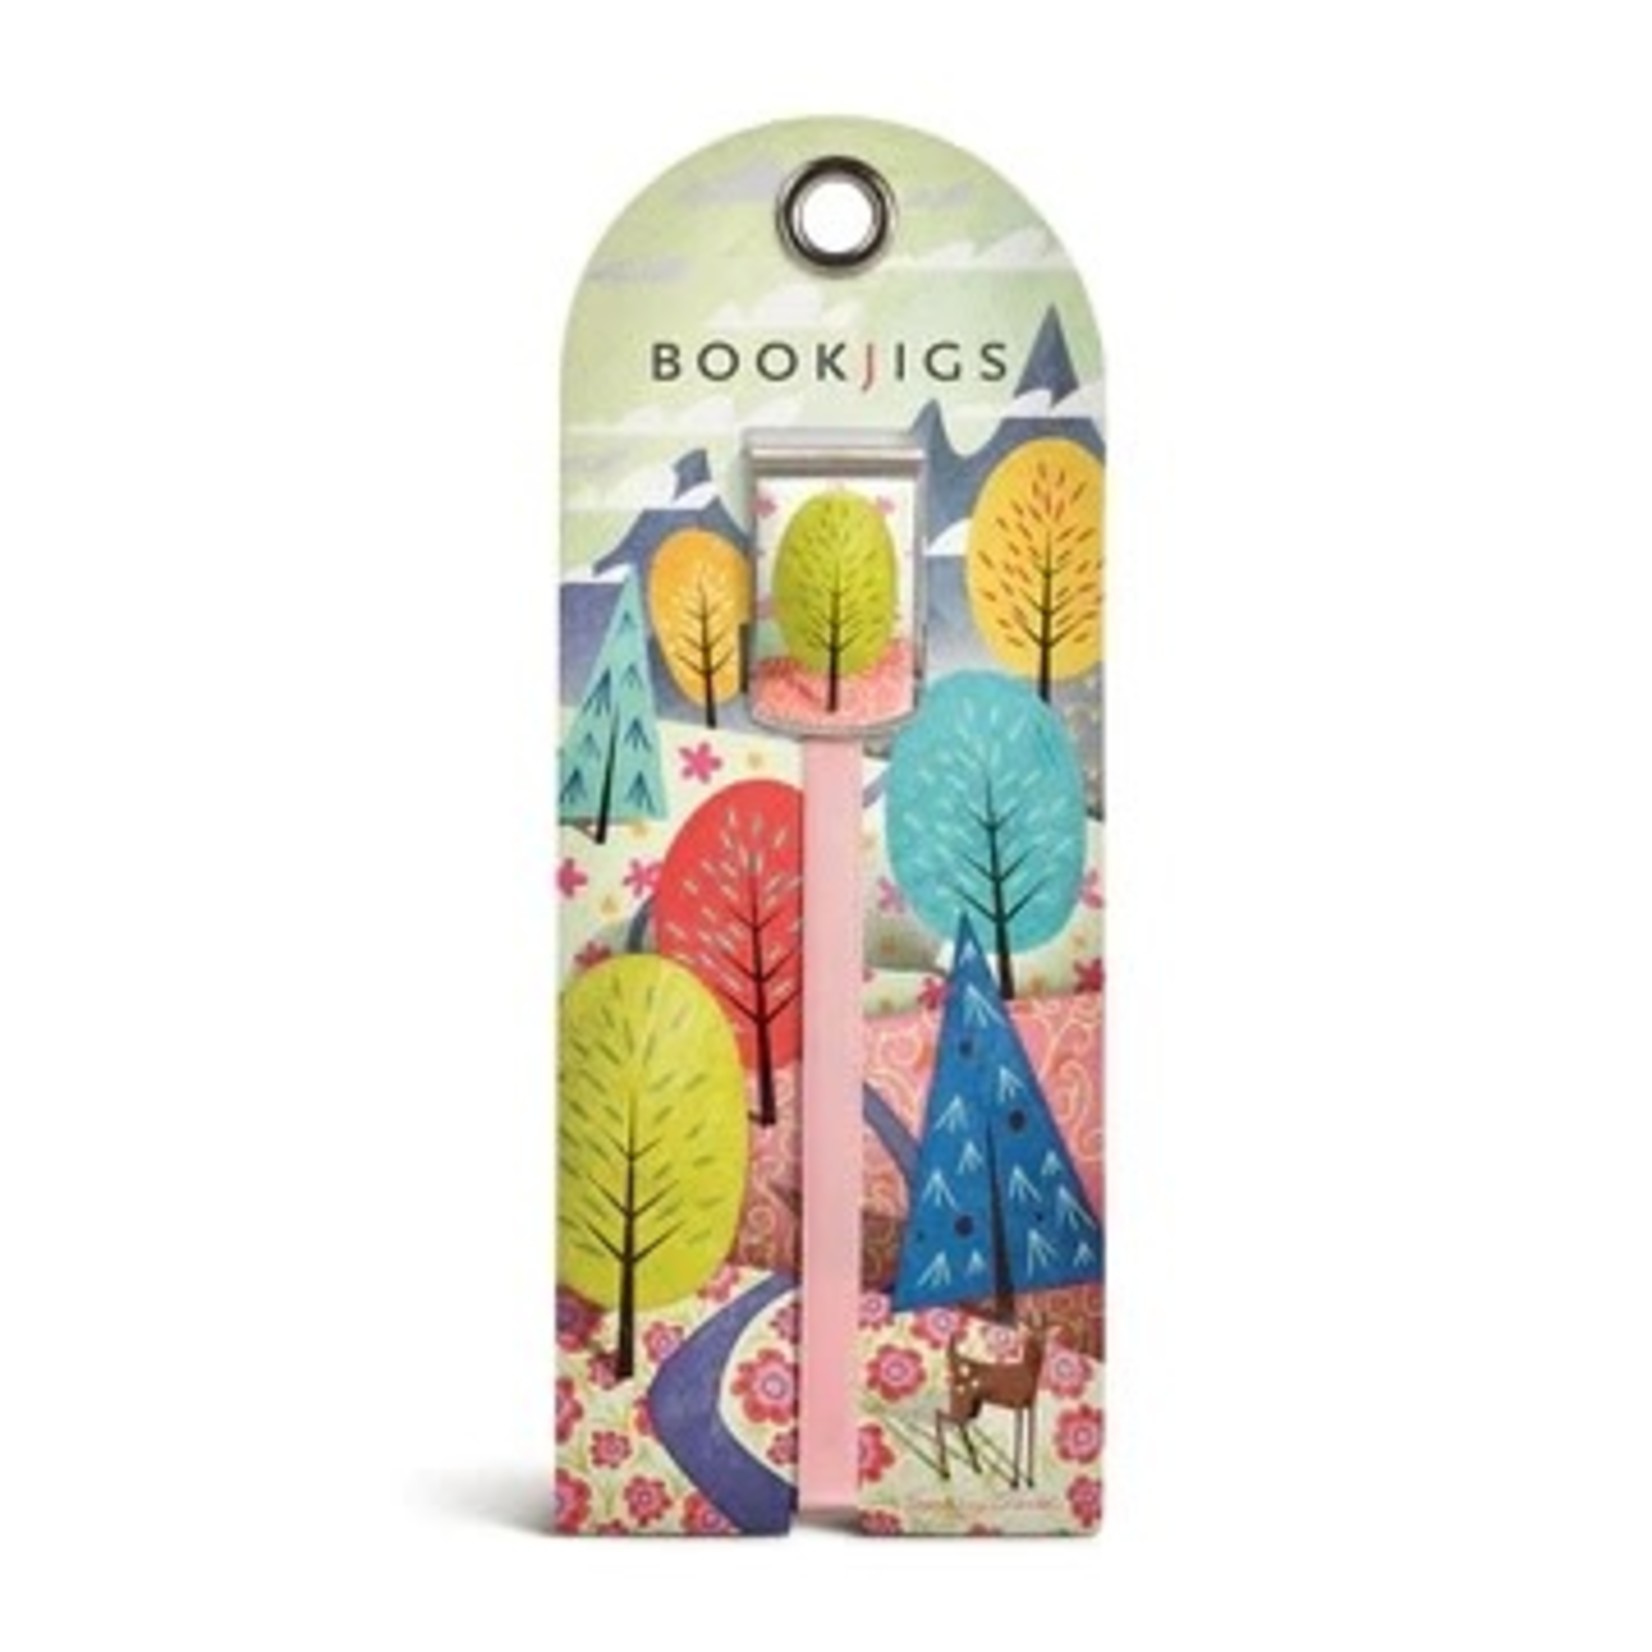 Bookjigs Bookmark - Spring Forth